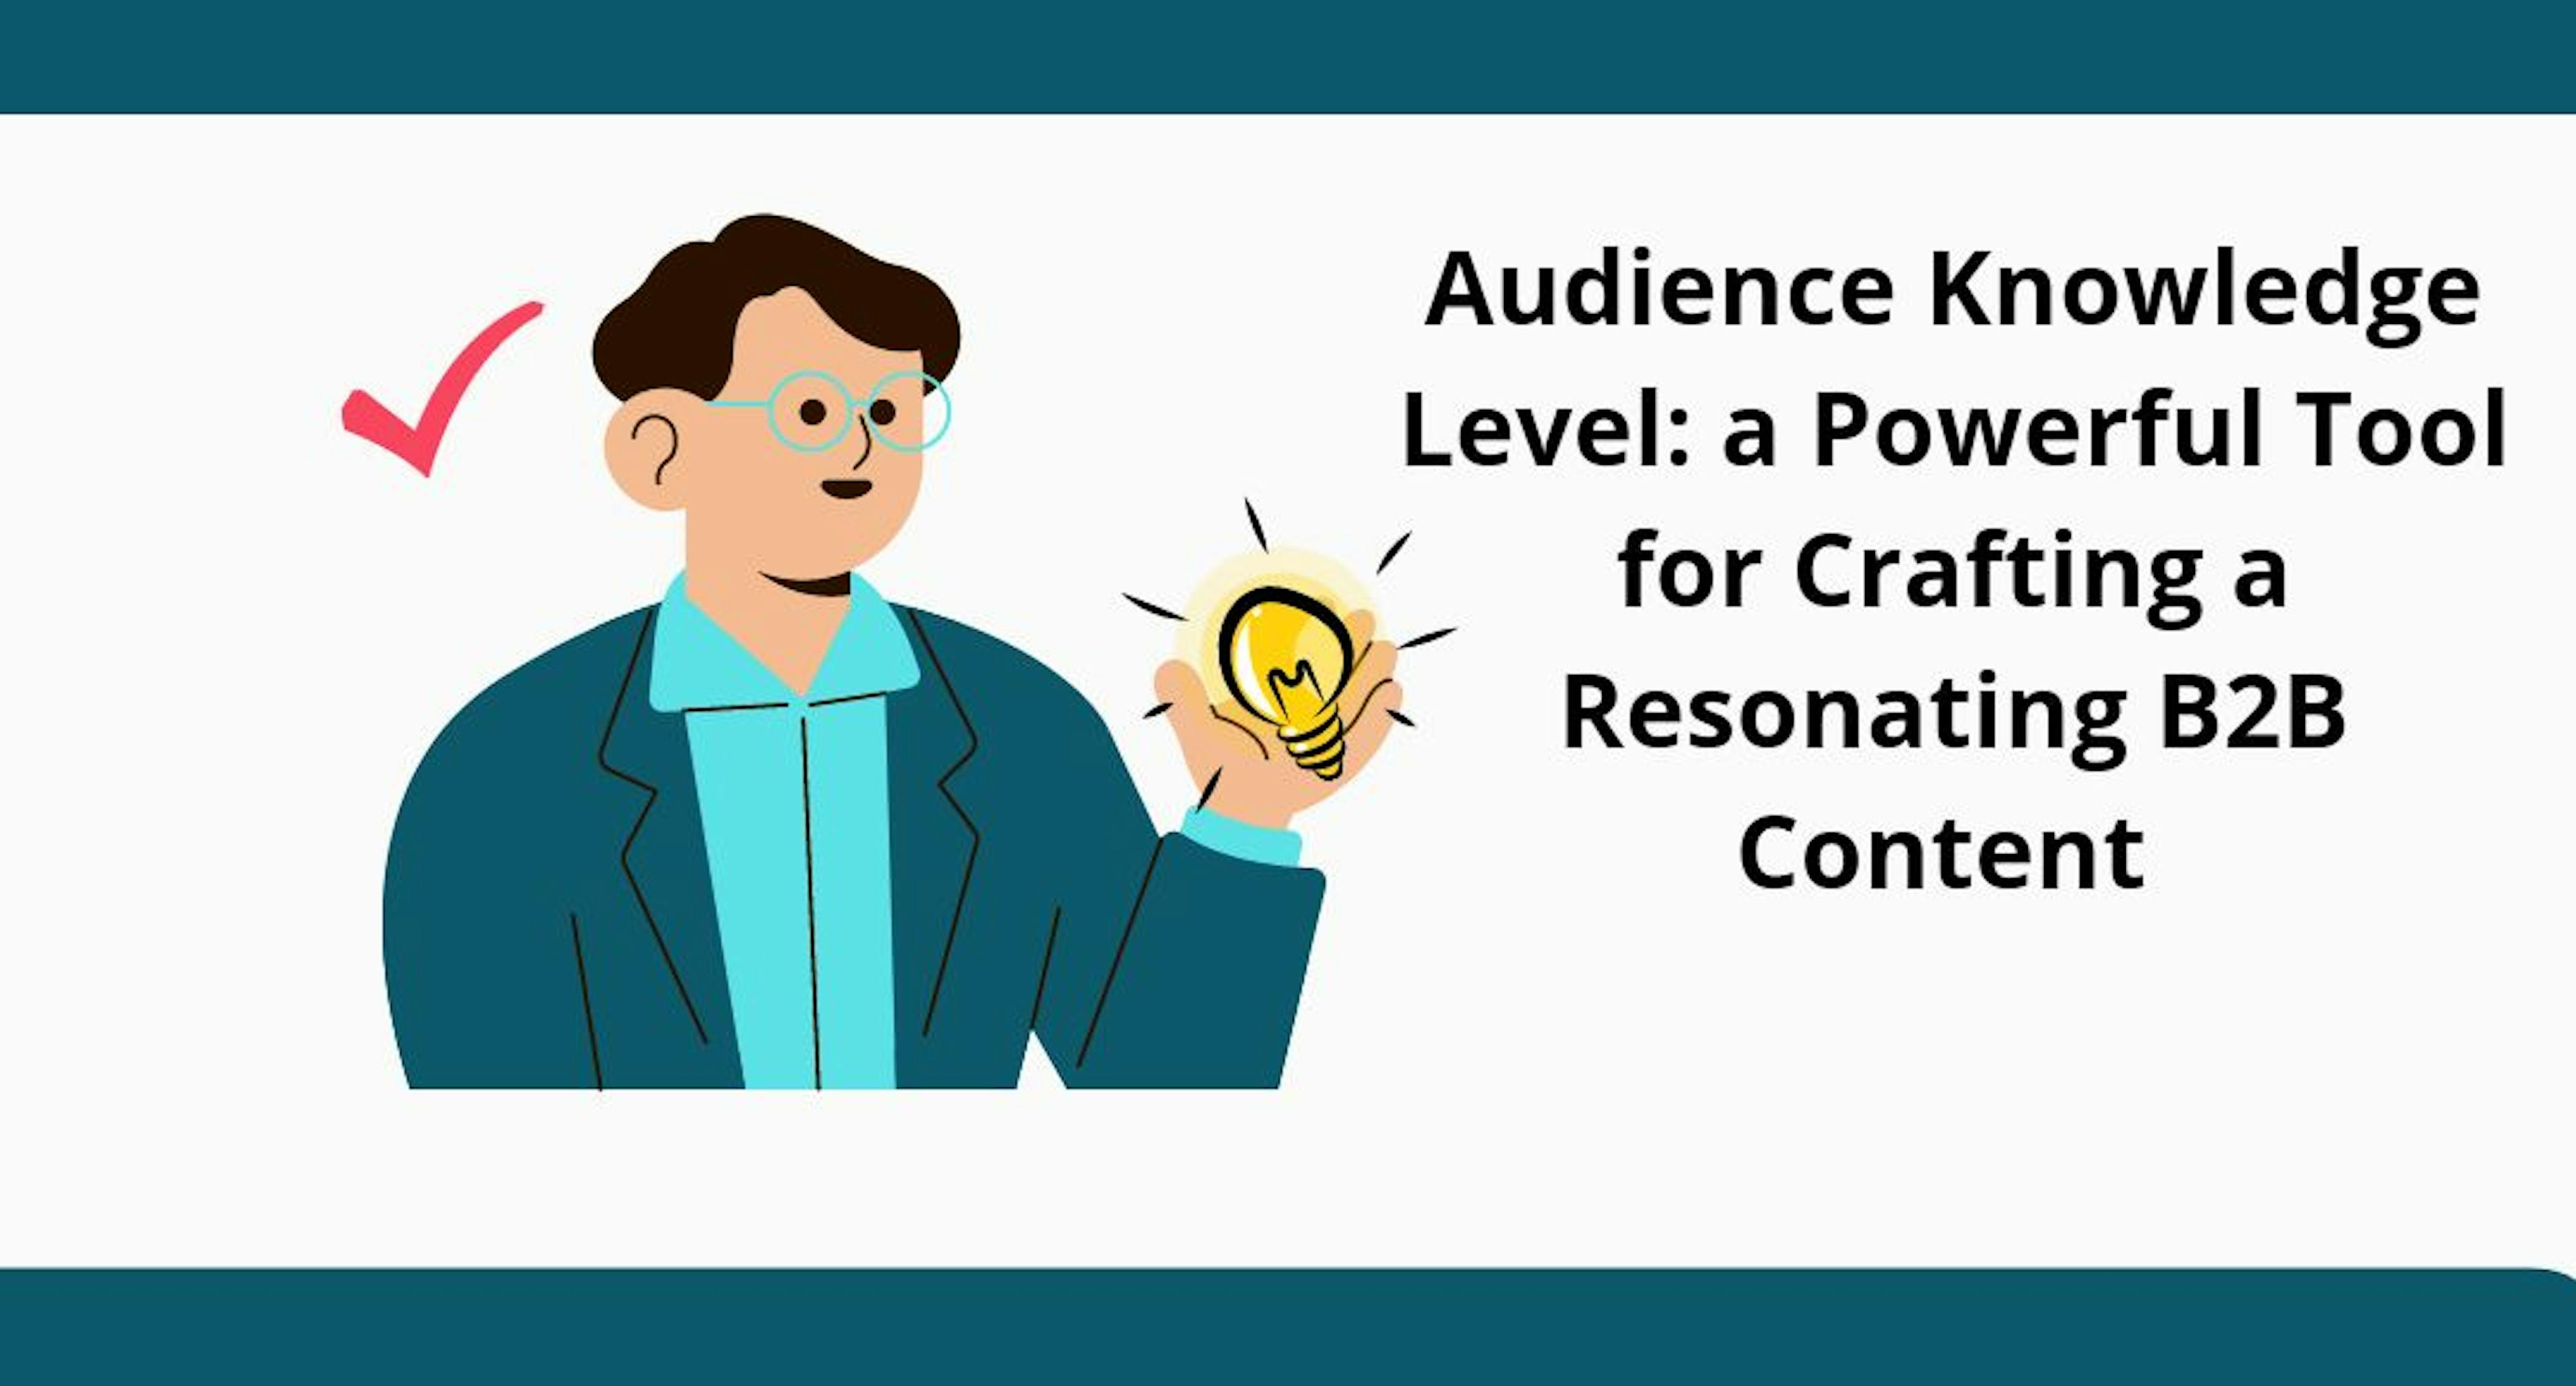 /audience-knowledge-level-a-powerful-tool-for-crafting-a-resonating-b2b-content feature image